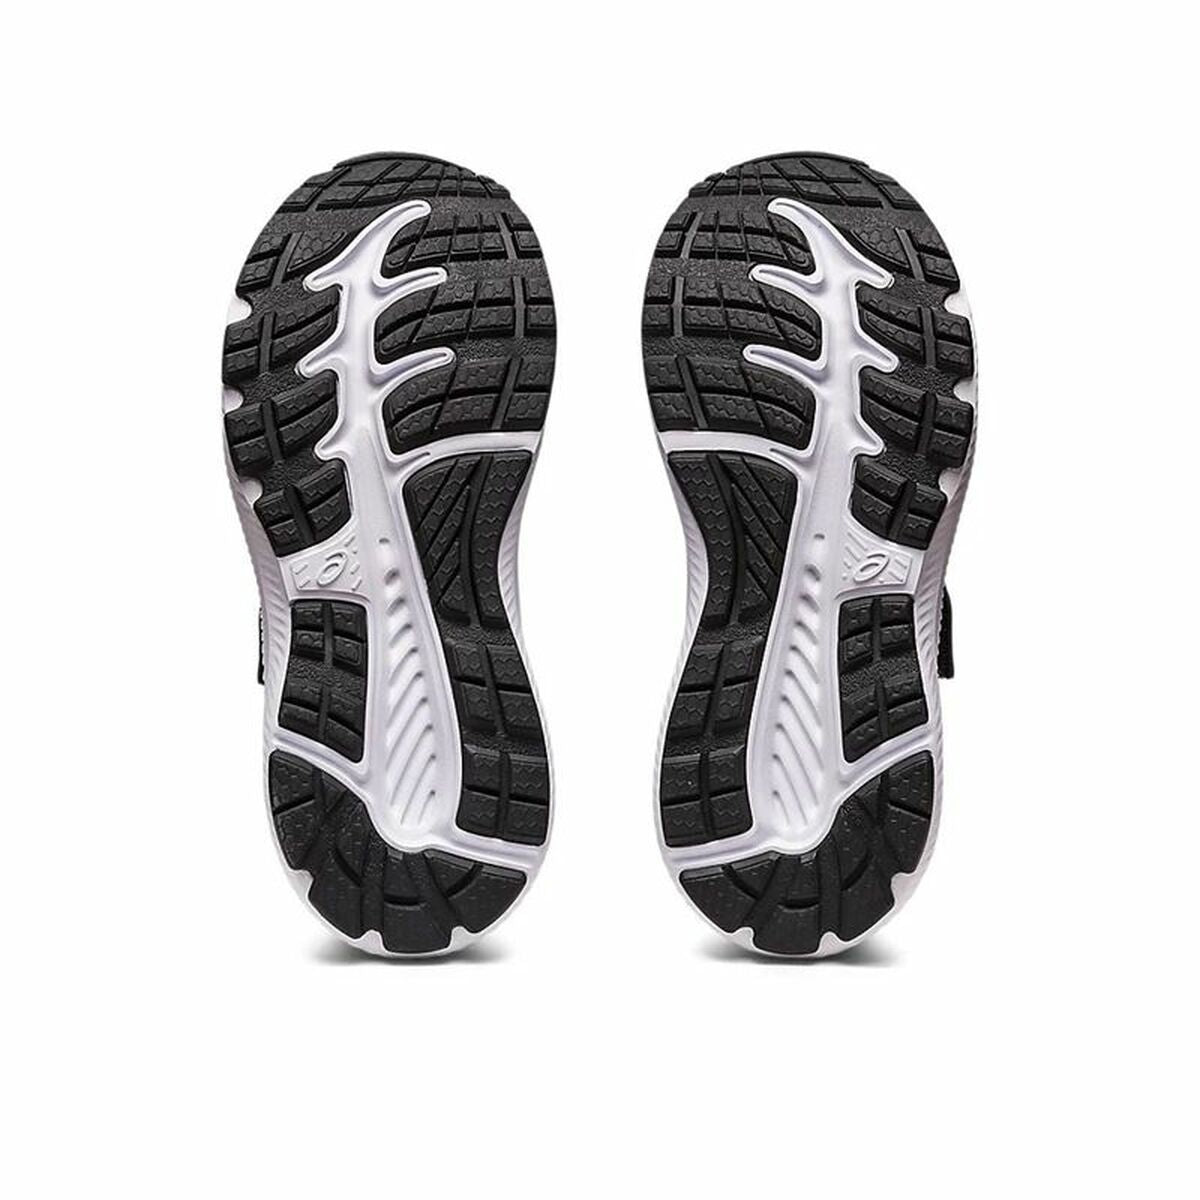 Running Shoes for Kids Asics Contend 8 Black - Little Baby Shop